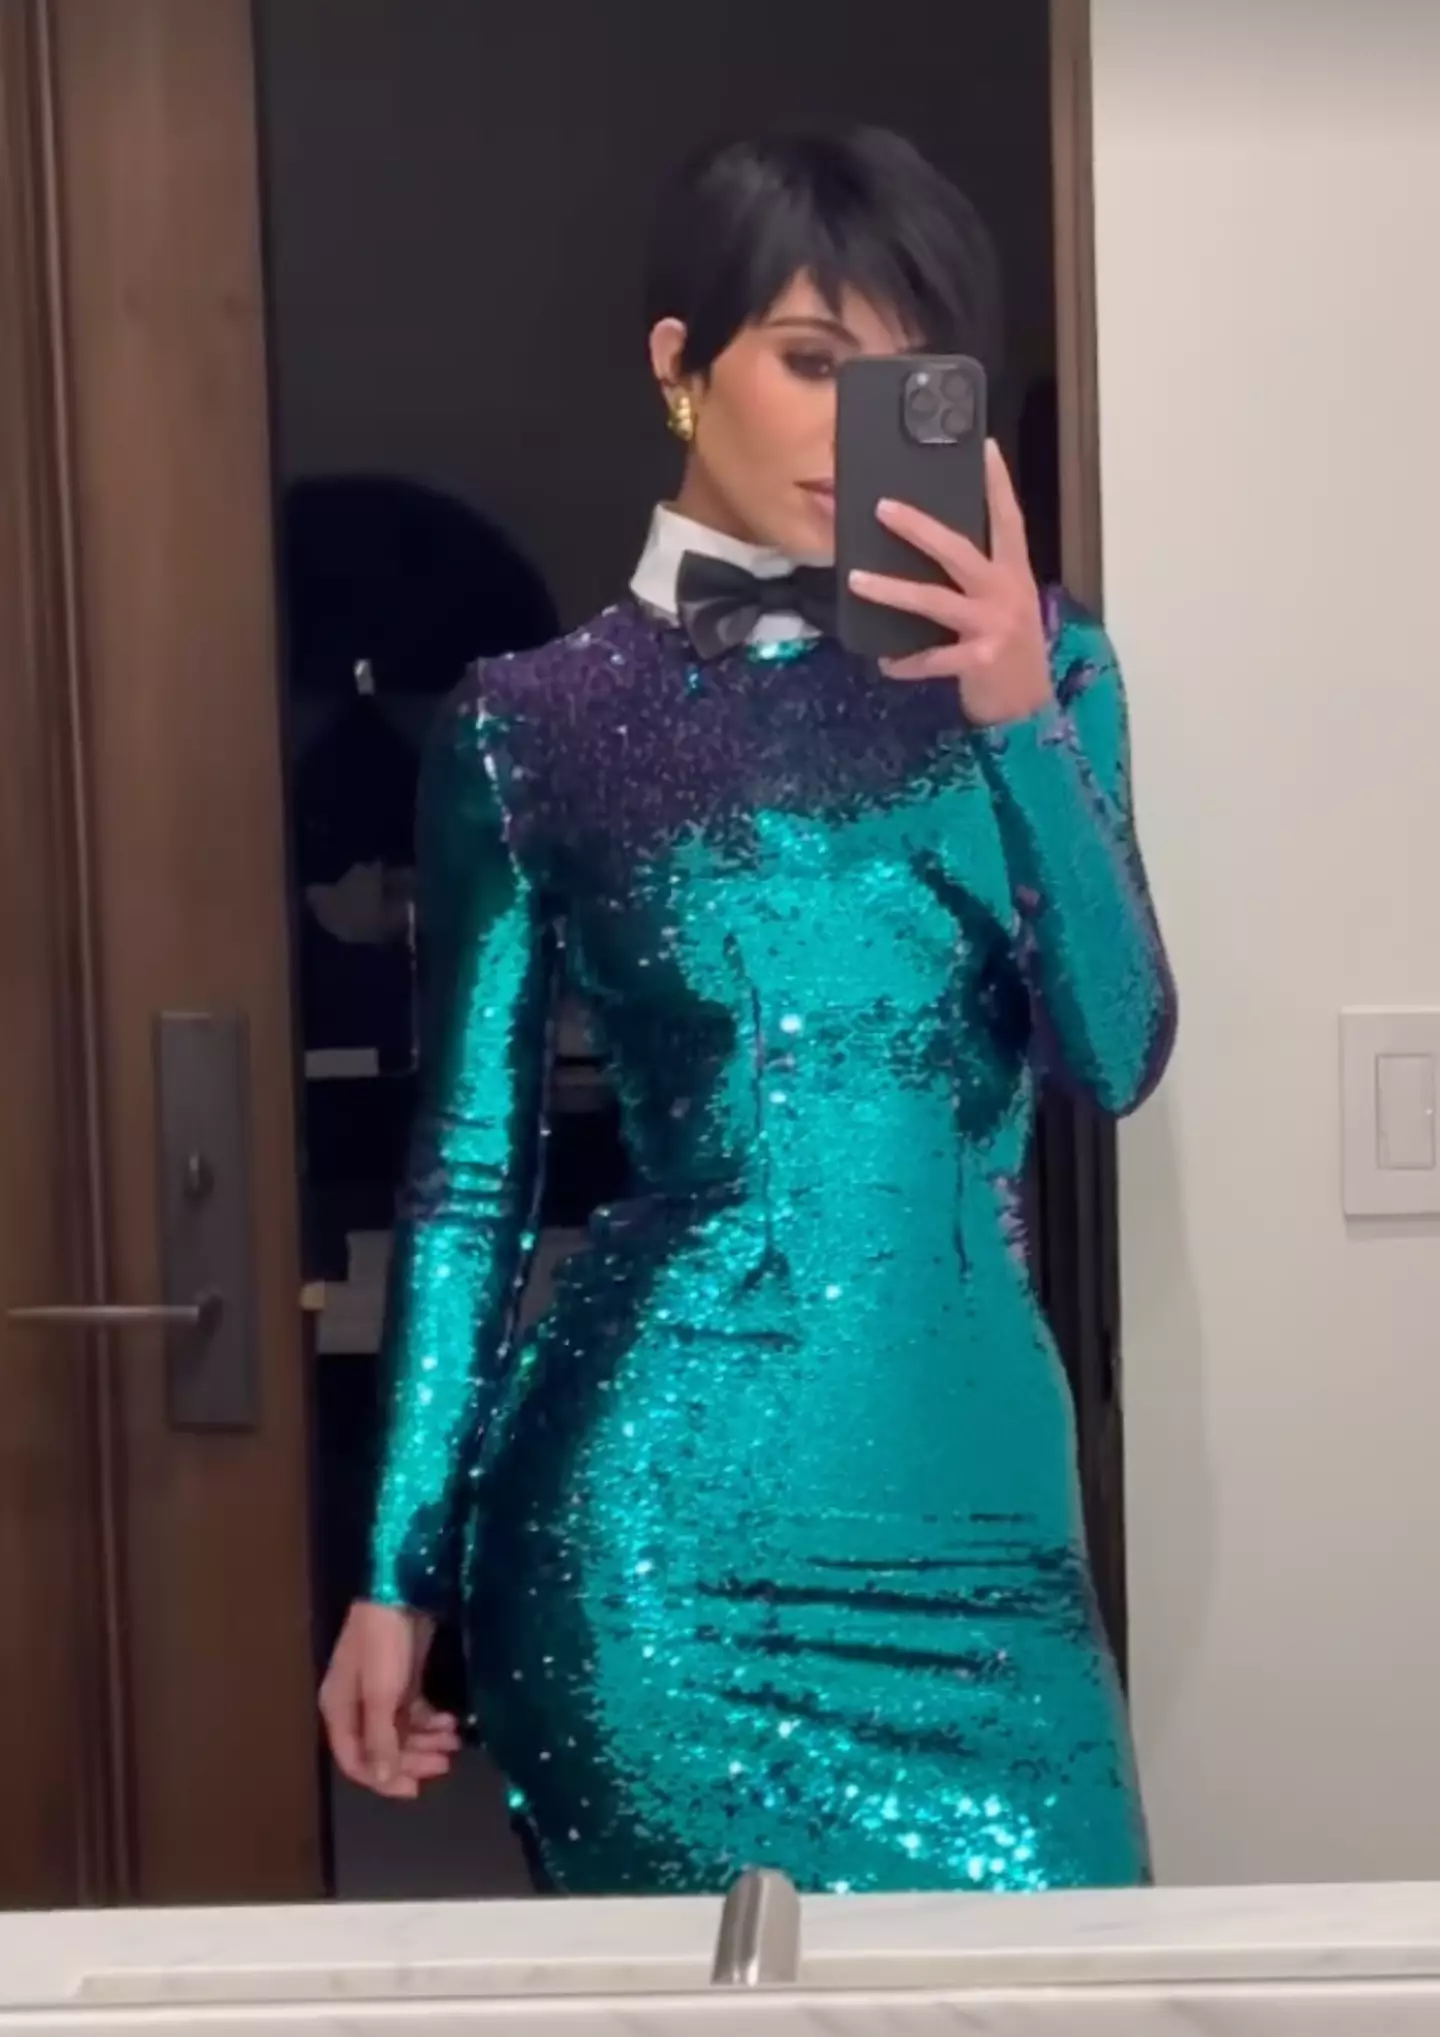 Kim was dressed up as 2011 Kris Jenner.